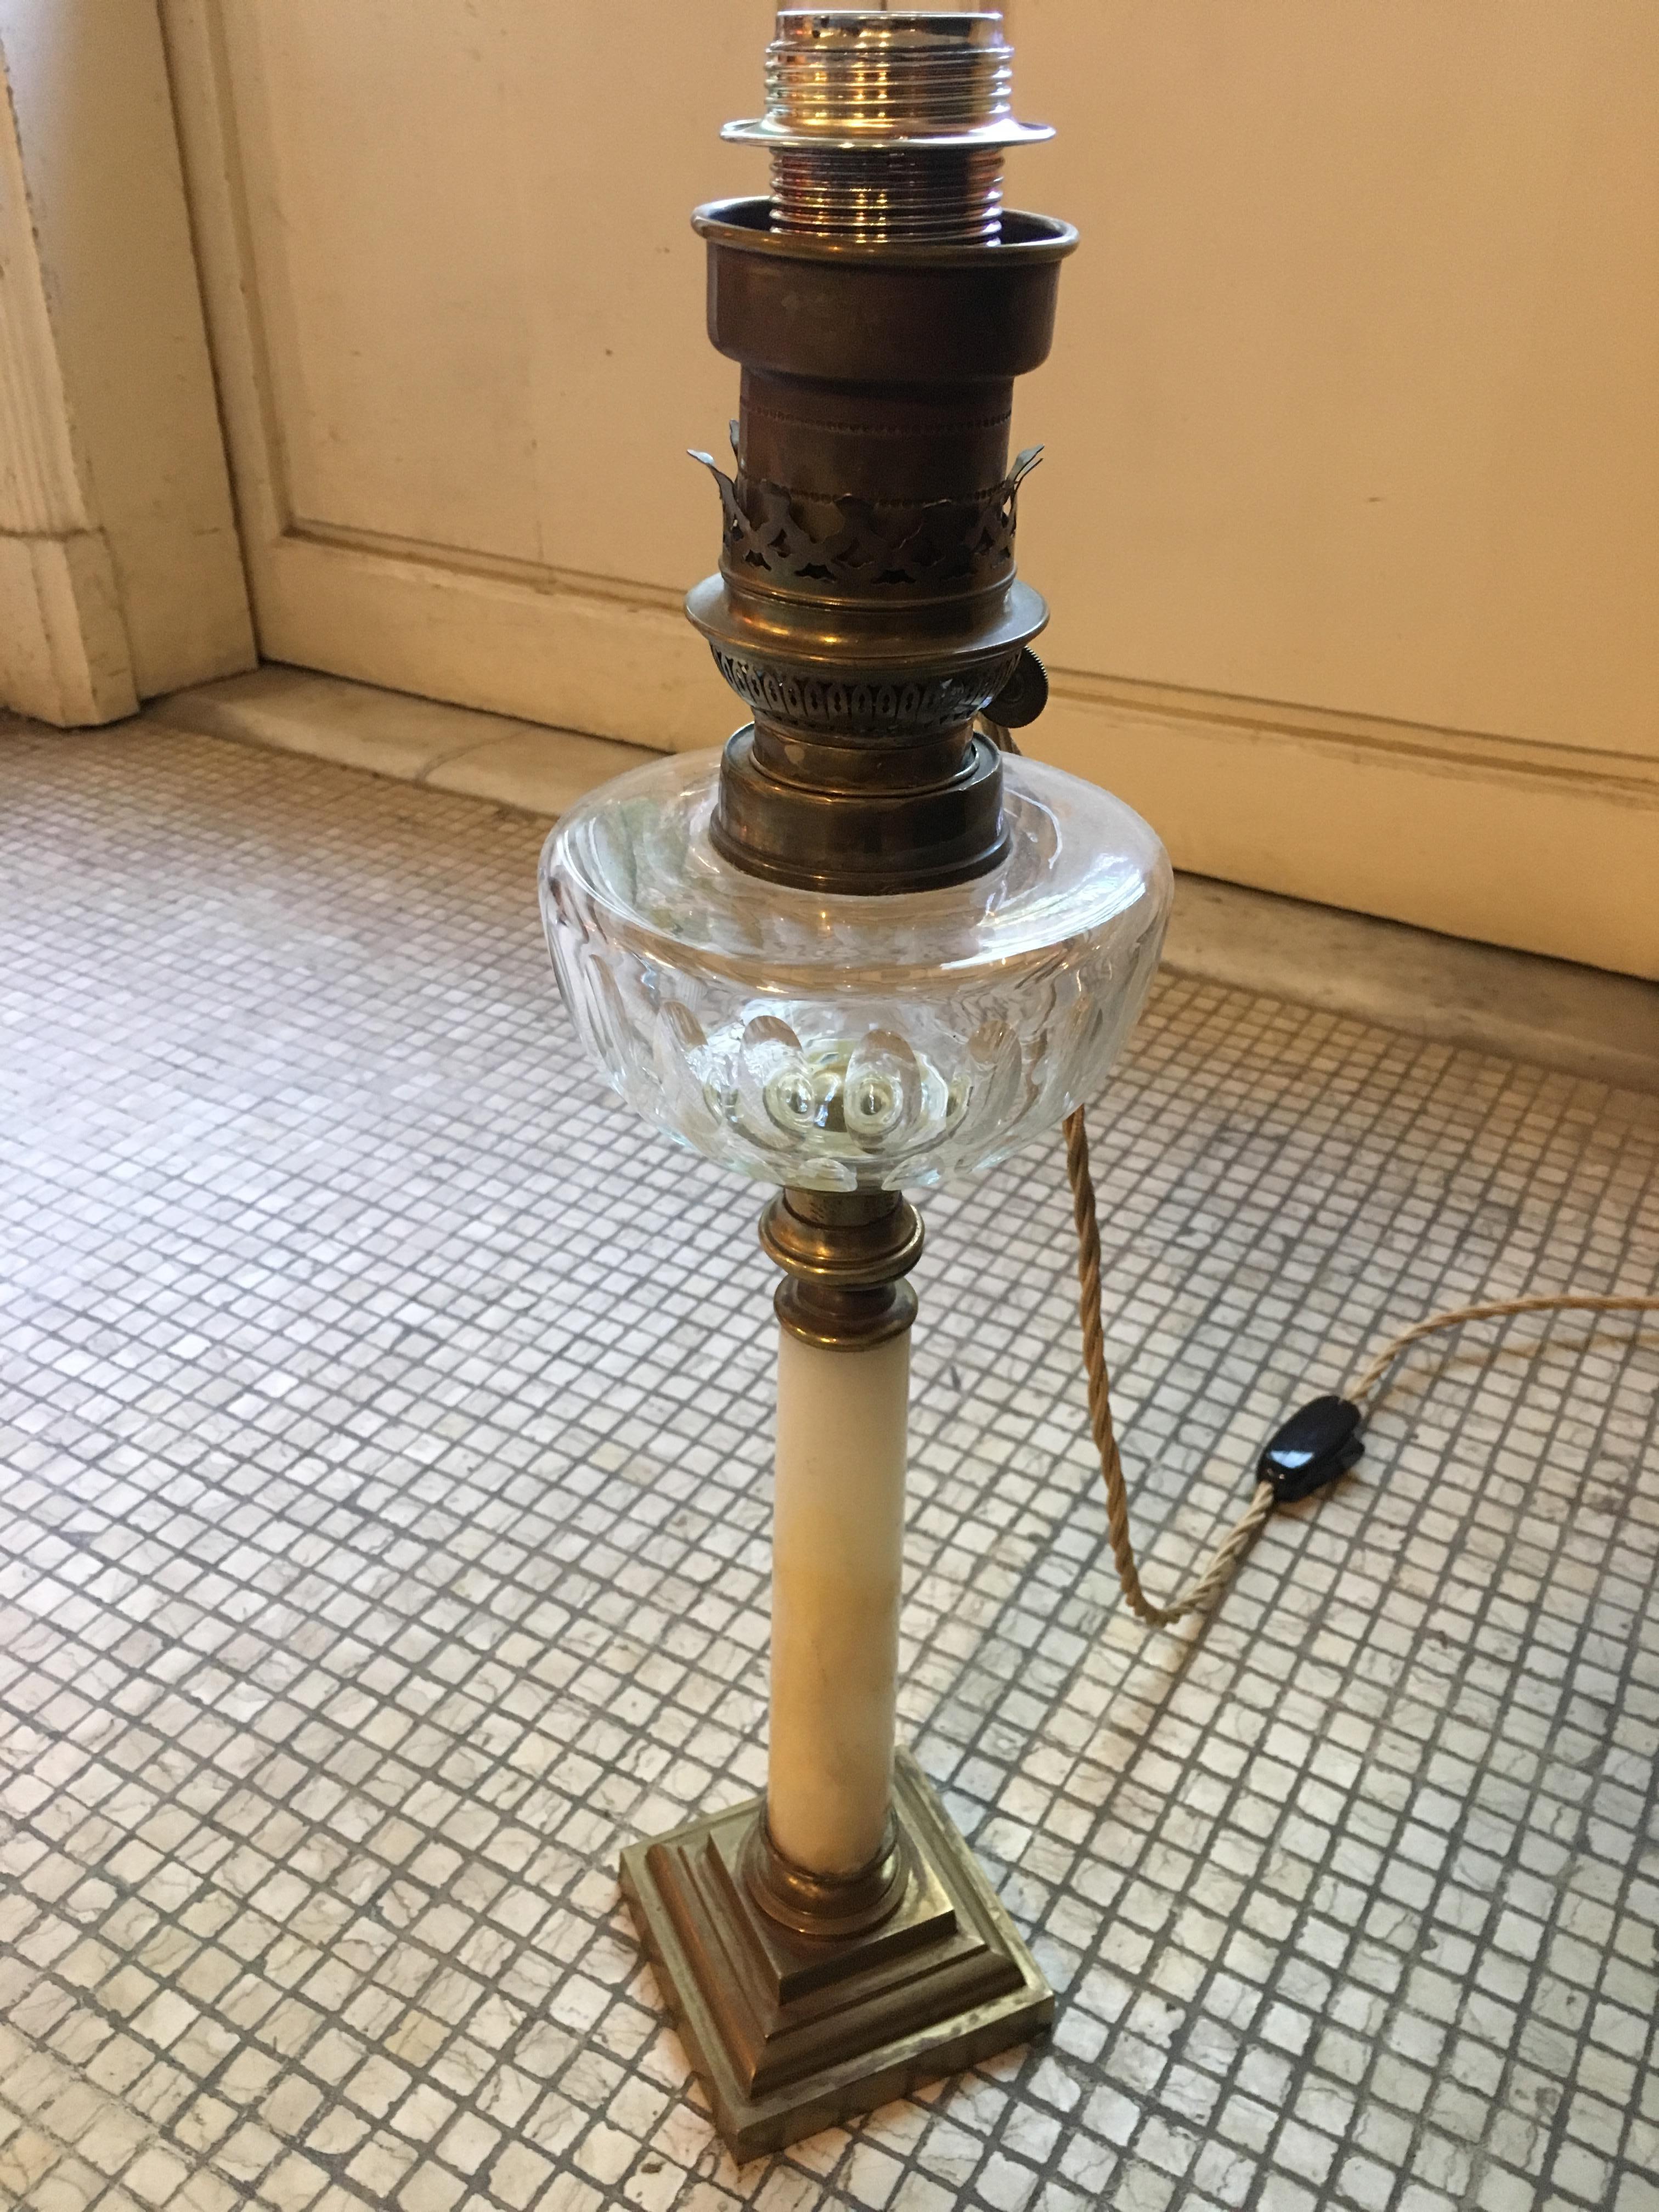 19th Century French Oil Lamp with Glass and Marble Converted into Electric Lamp im Zustand „Gut“ im Angebot in Florence, IT